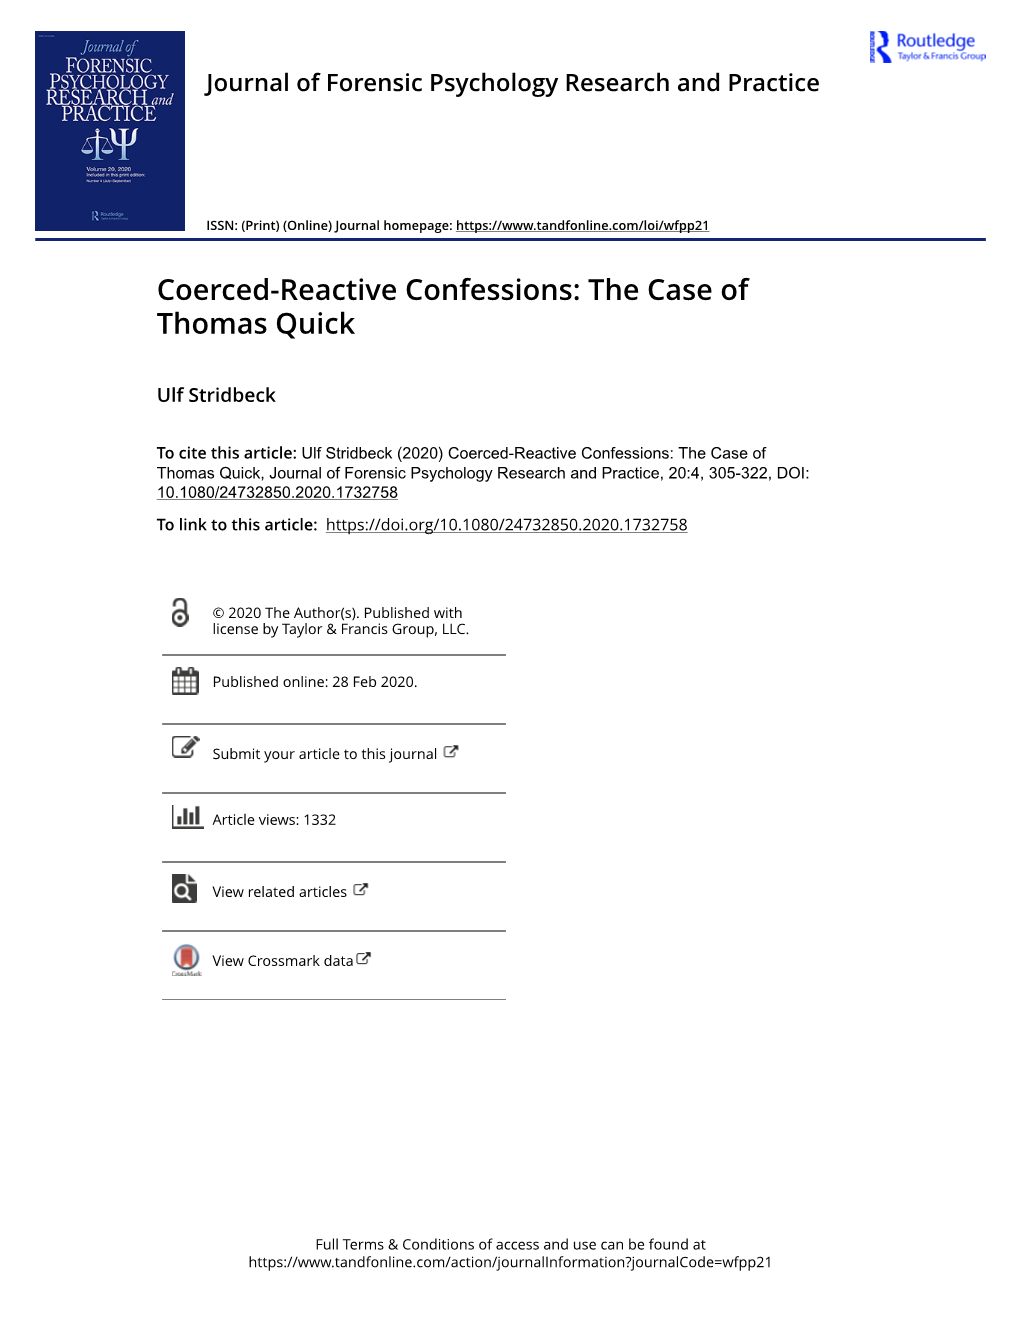 Coerced-Reactive Confessions: the Case of Thomas Quick